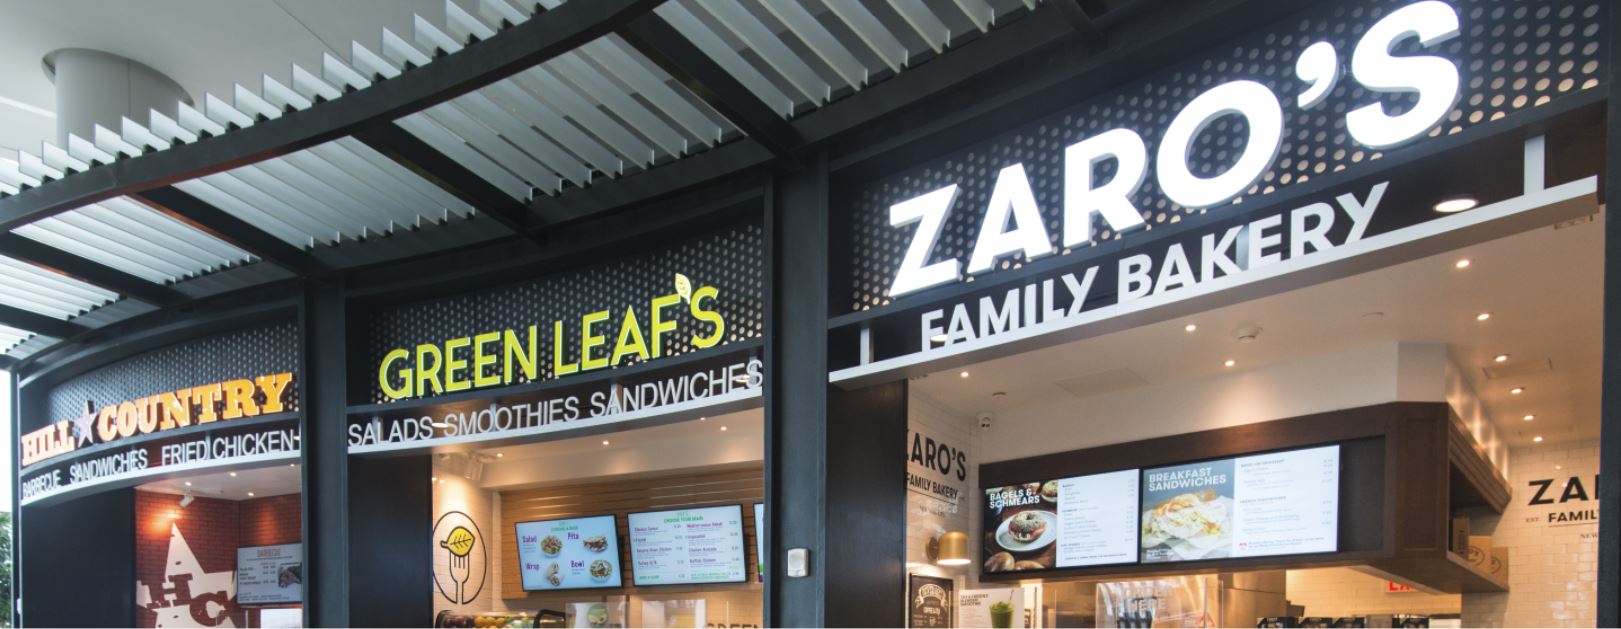 Hill Country, Green leafs and Zaro's stores